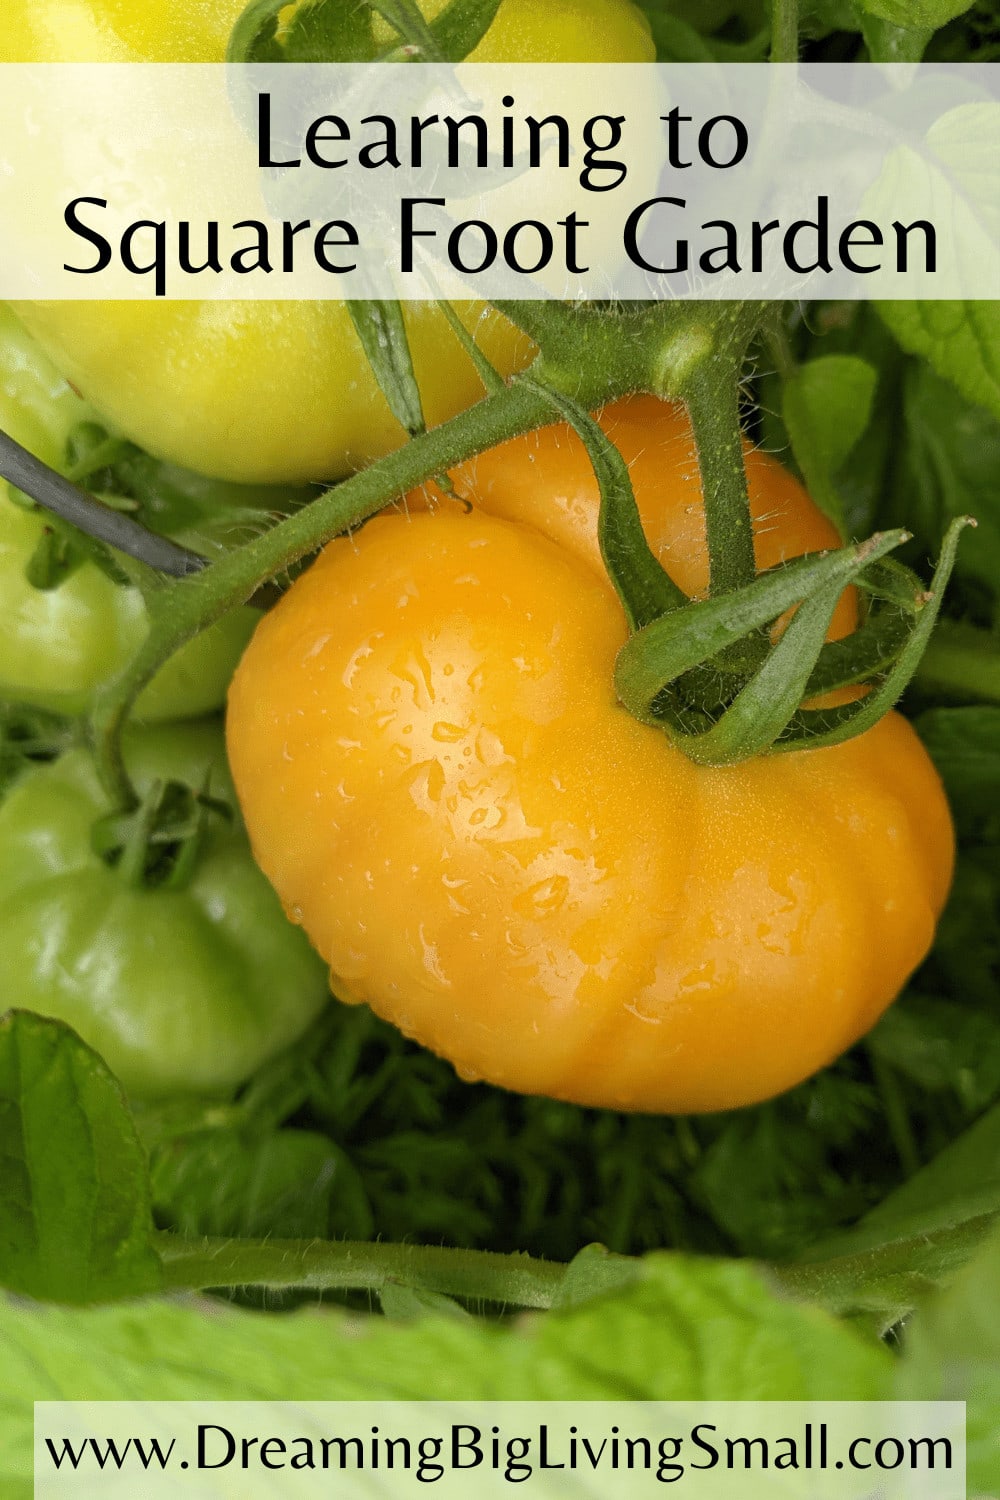 Learning to Square Foot Garden